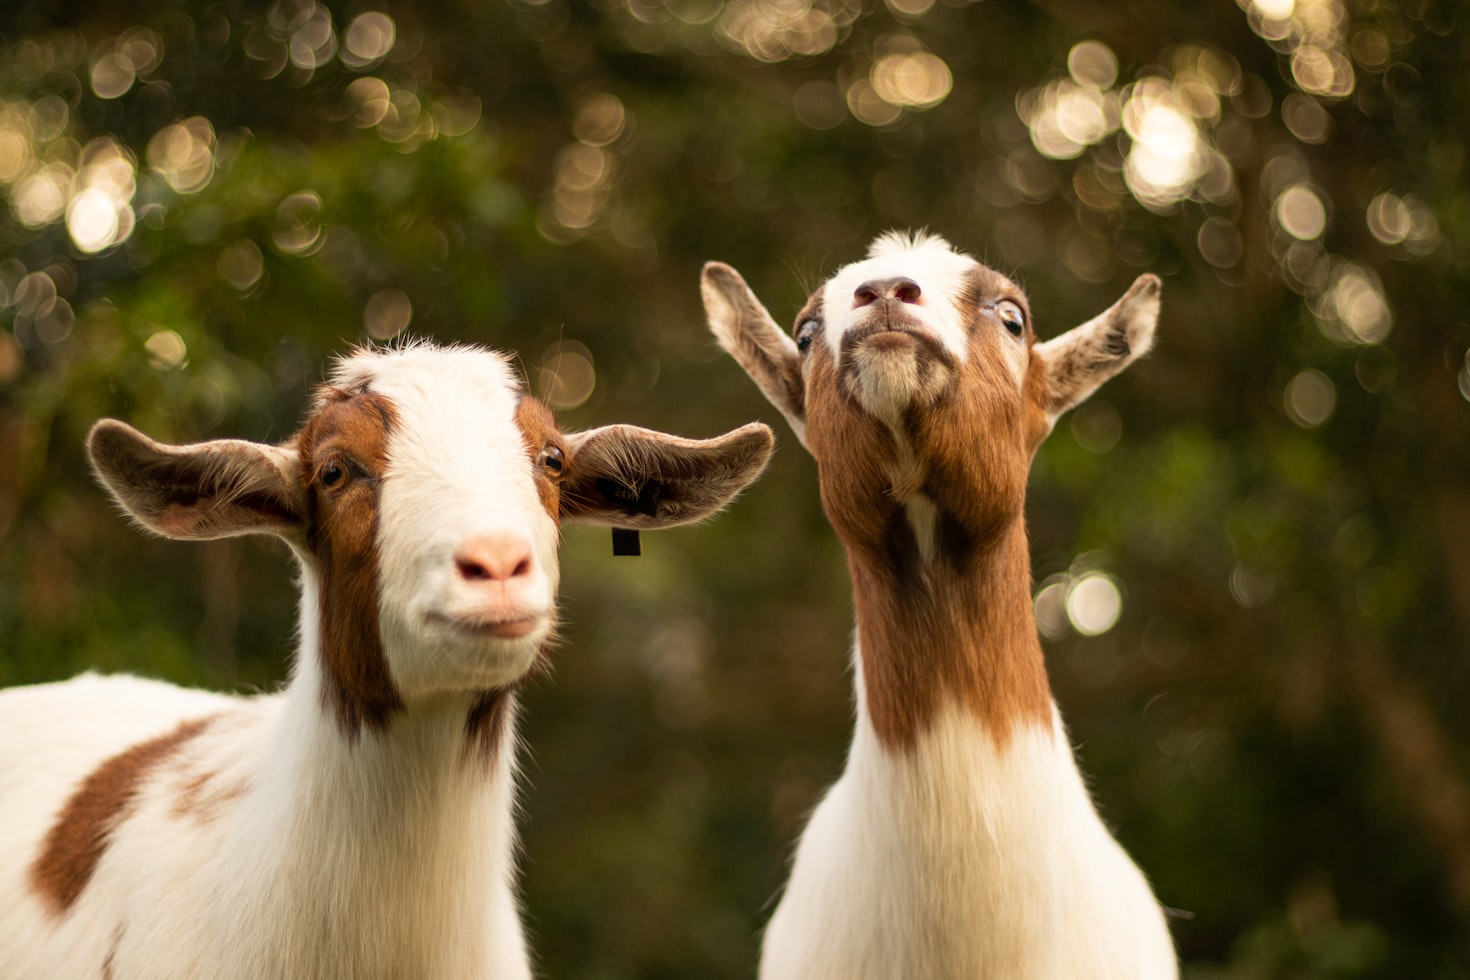 Top 10 Bedding For Goats Based On Customer Ratings